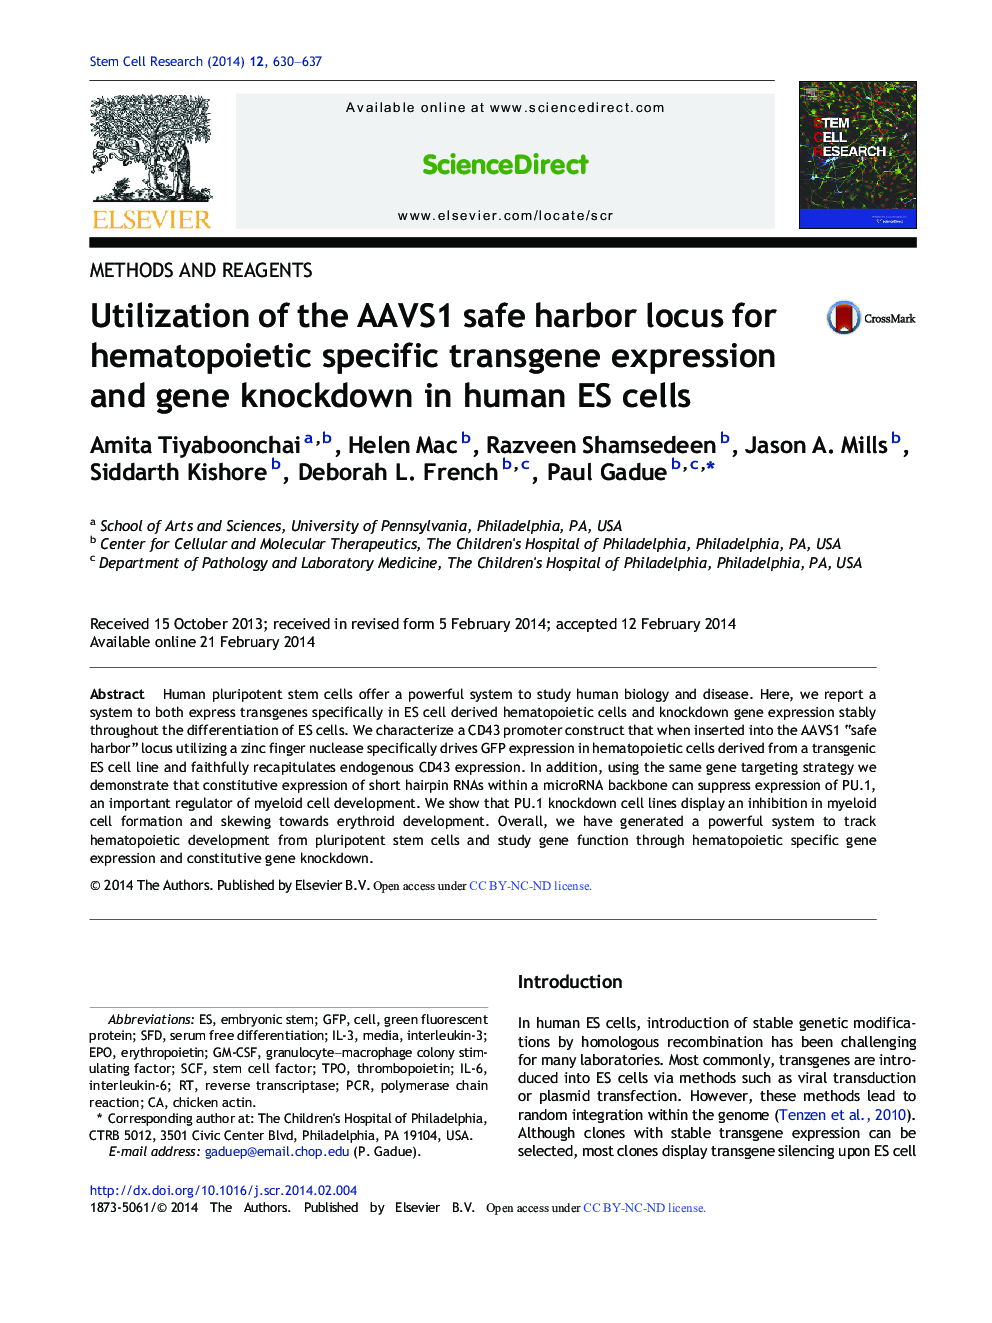 Utilization of the AAVS1 safe harbor locus for hematopoietic specific transgene expression and gene knockdown in human ES cells